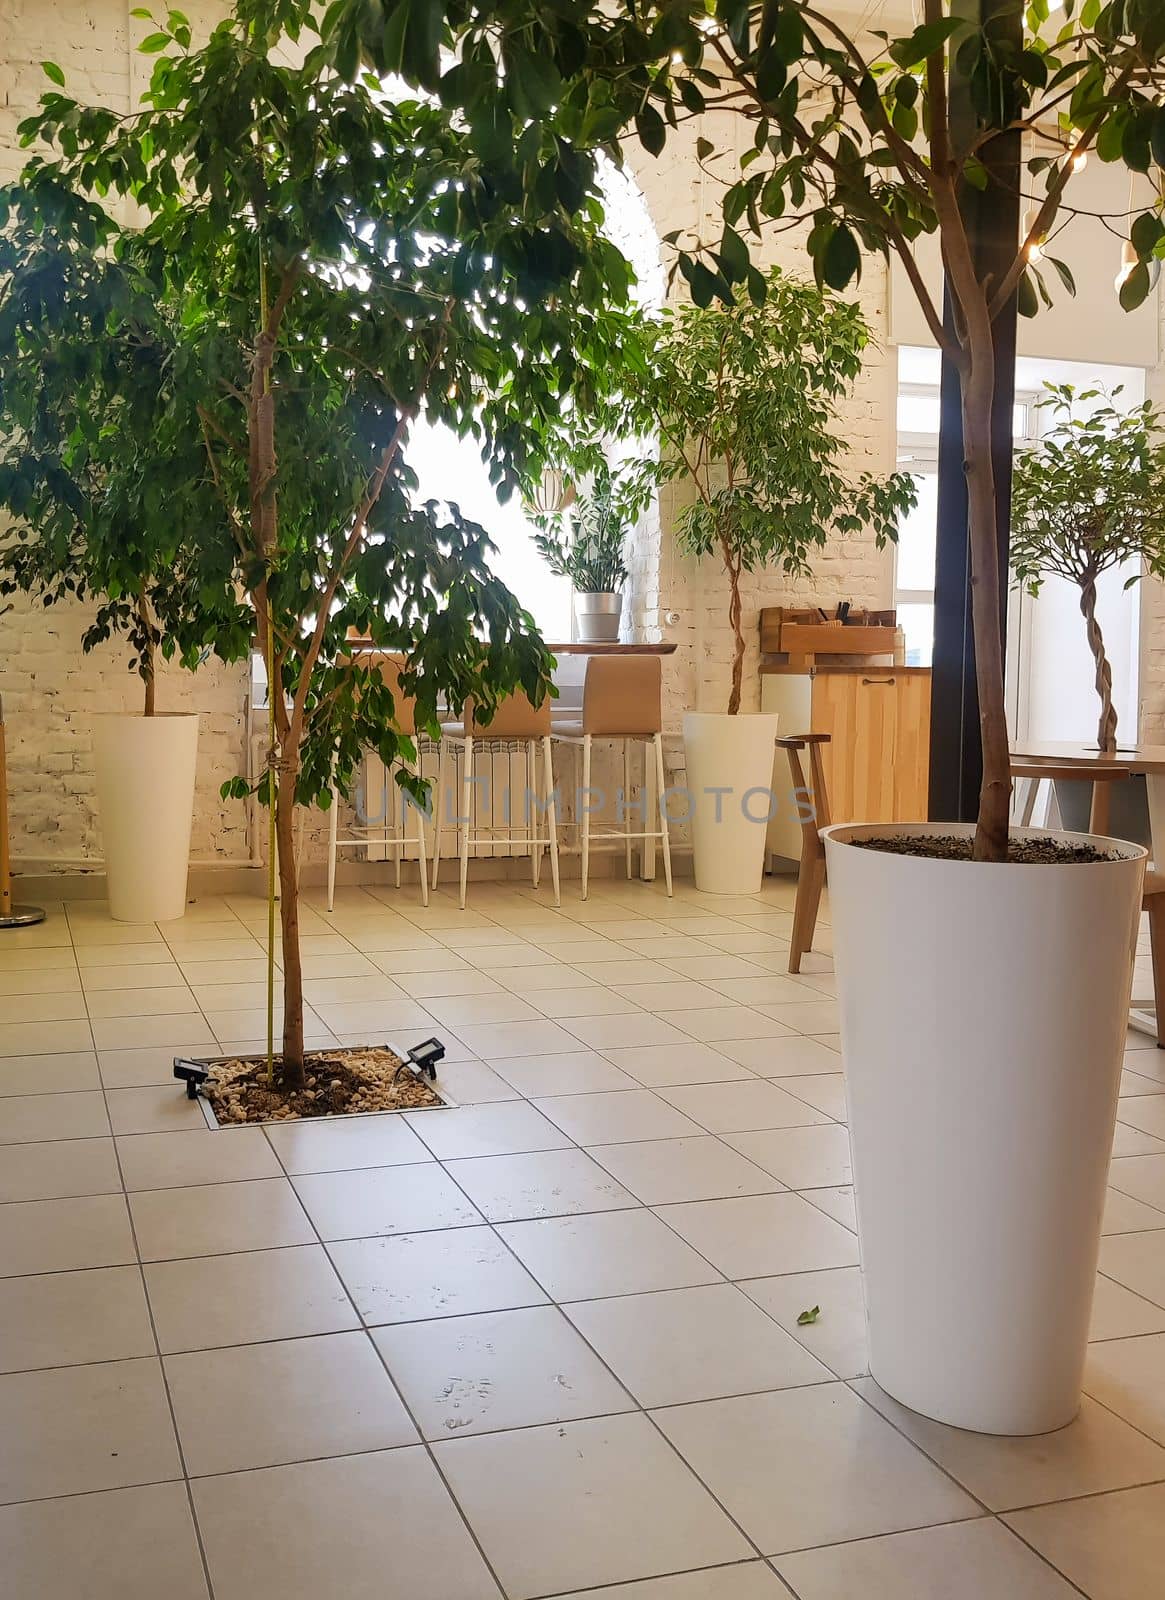 Cozy interior of a modern cafe with plants, chairs. A large pot with plants in the foreground of the vertical photo by claire_lucia